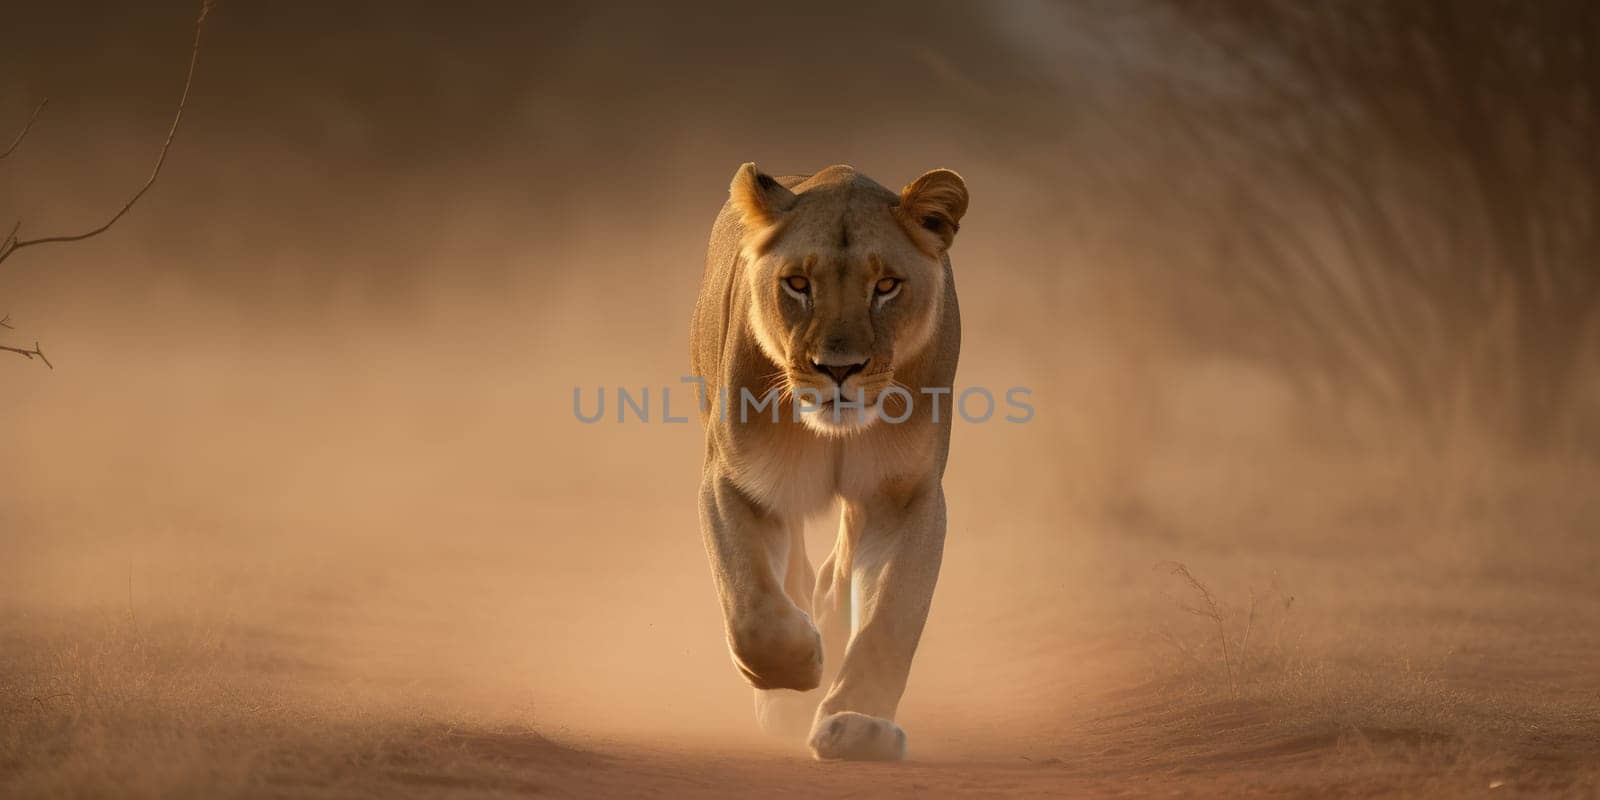 Lioness wandering through the steppe by tan4ikk1